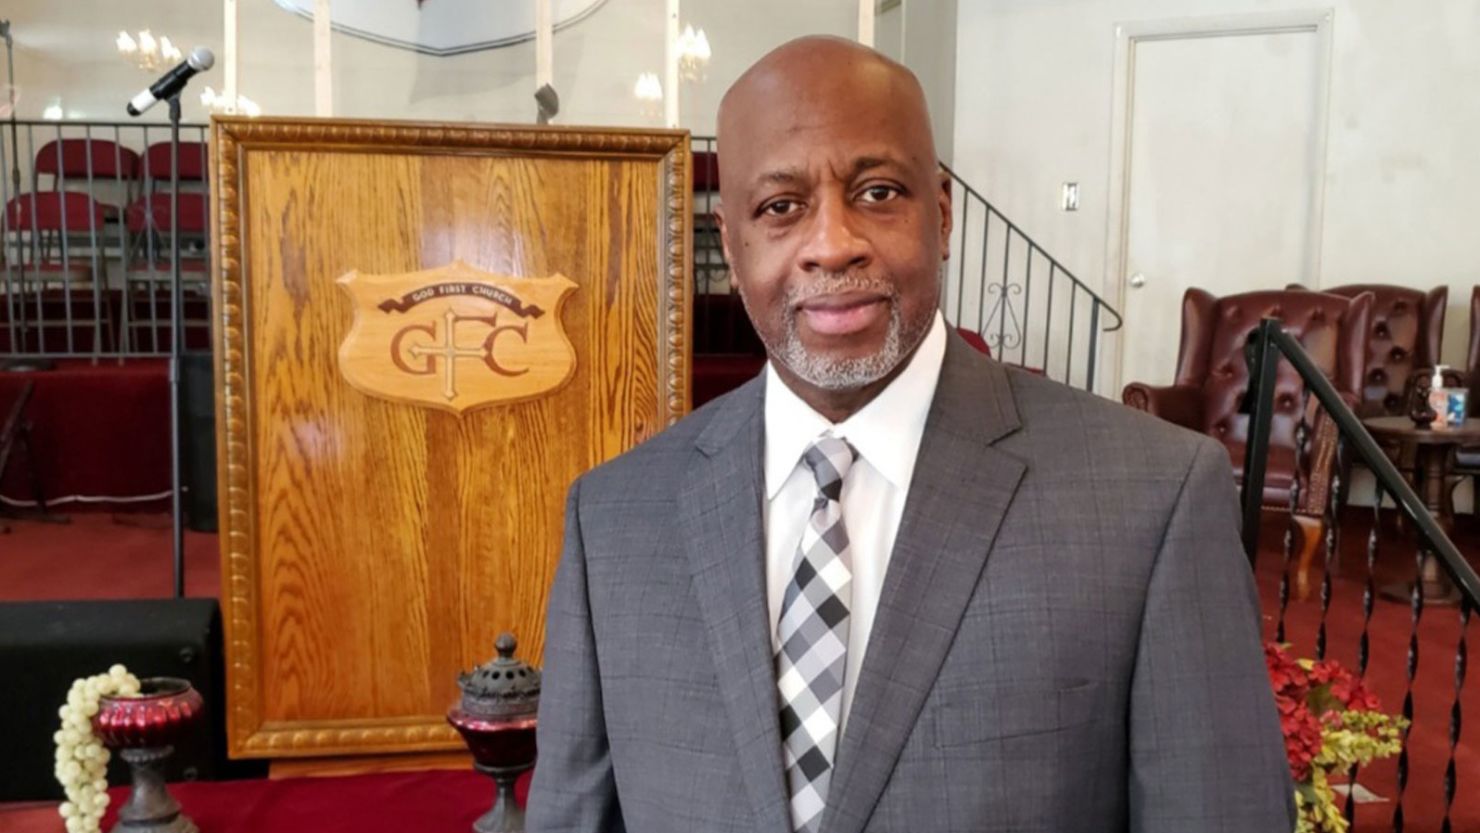 Two congregants expressed suicidal thoughts to Carl Lucas, pastor at God First Church in northern St. Louis County. "The pandemic has definitely put us in a place where we're looking for answers and looking for other avenues to help our members," he said.